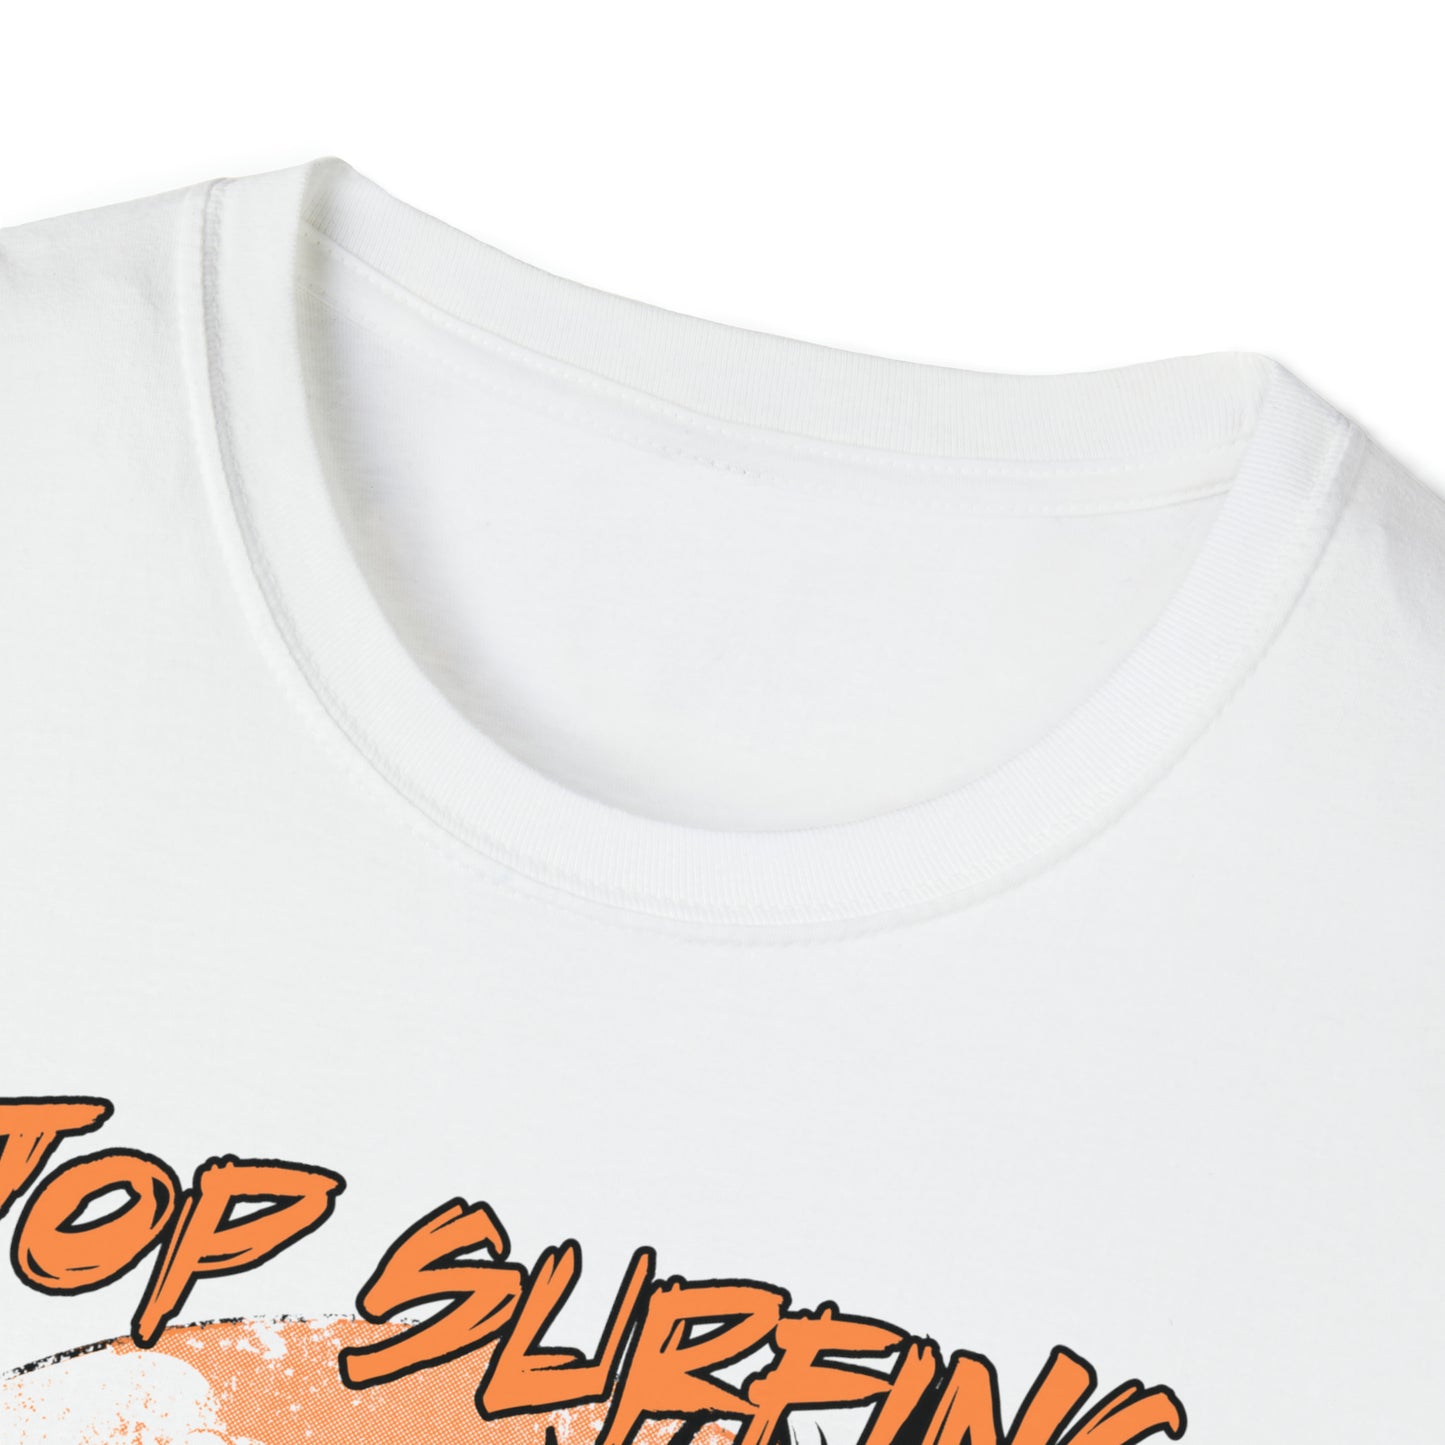 Stop Surfing - Go To Therapy Shirt